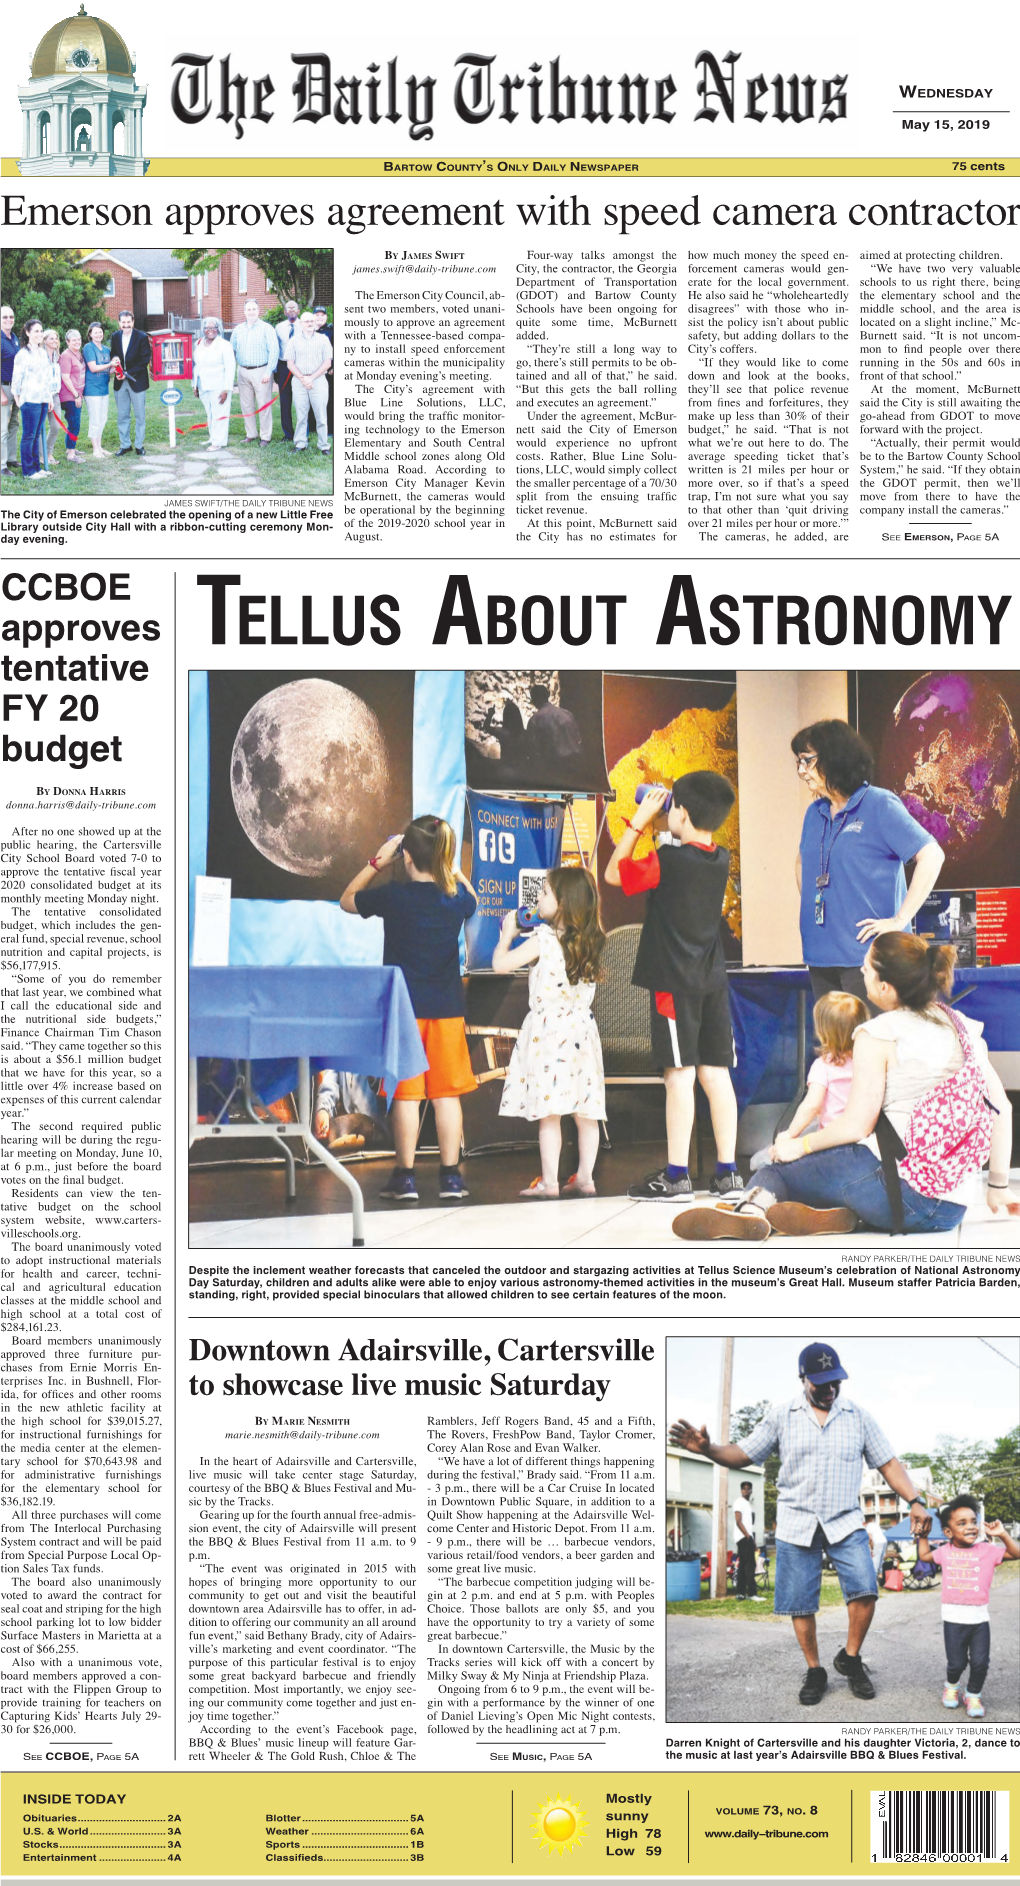 TELLUS ABOUT ASTRONOMY Tentative FY 20 Budget